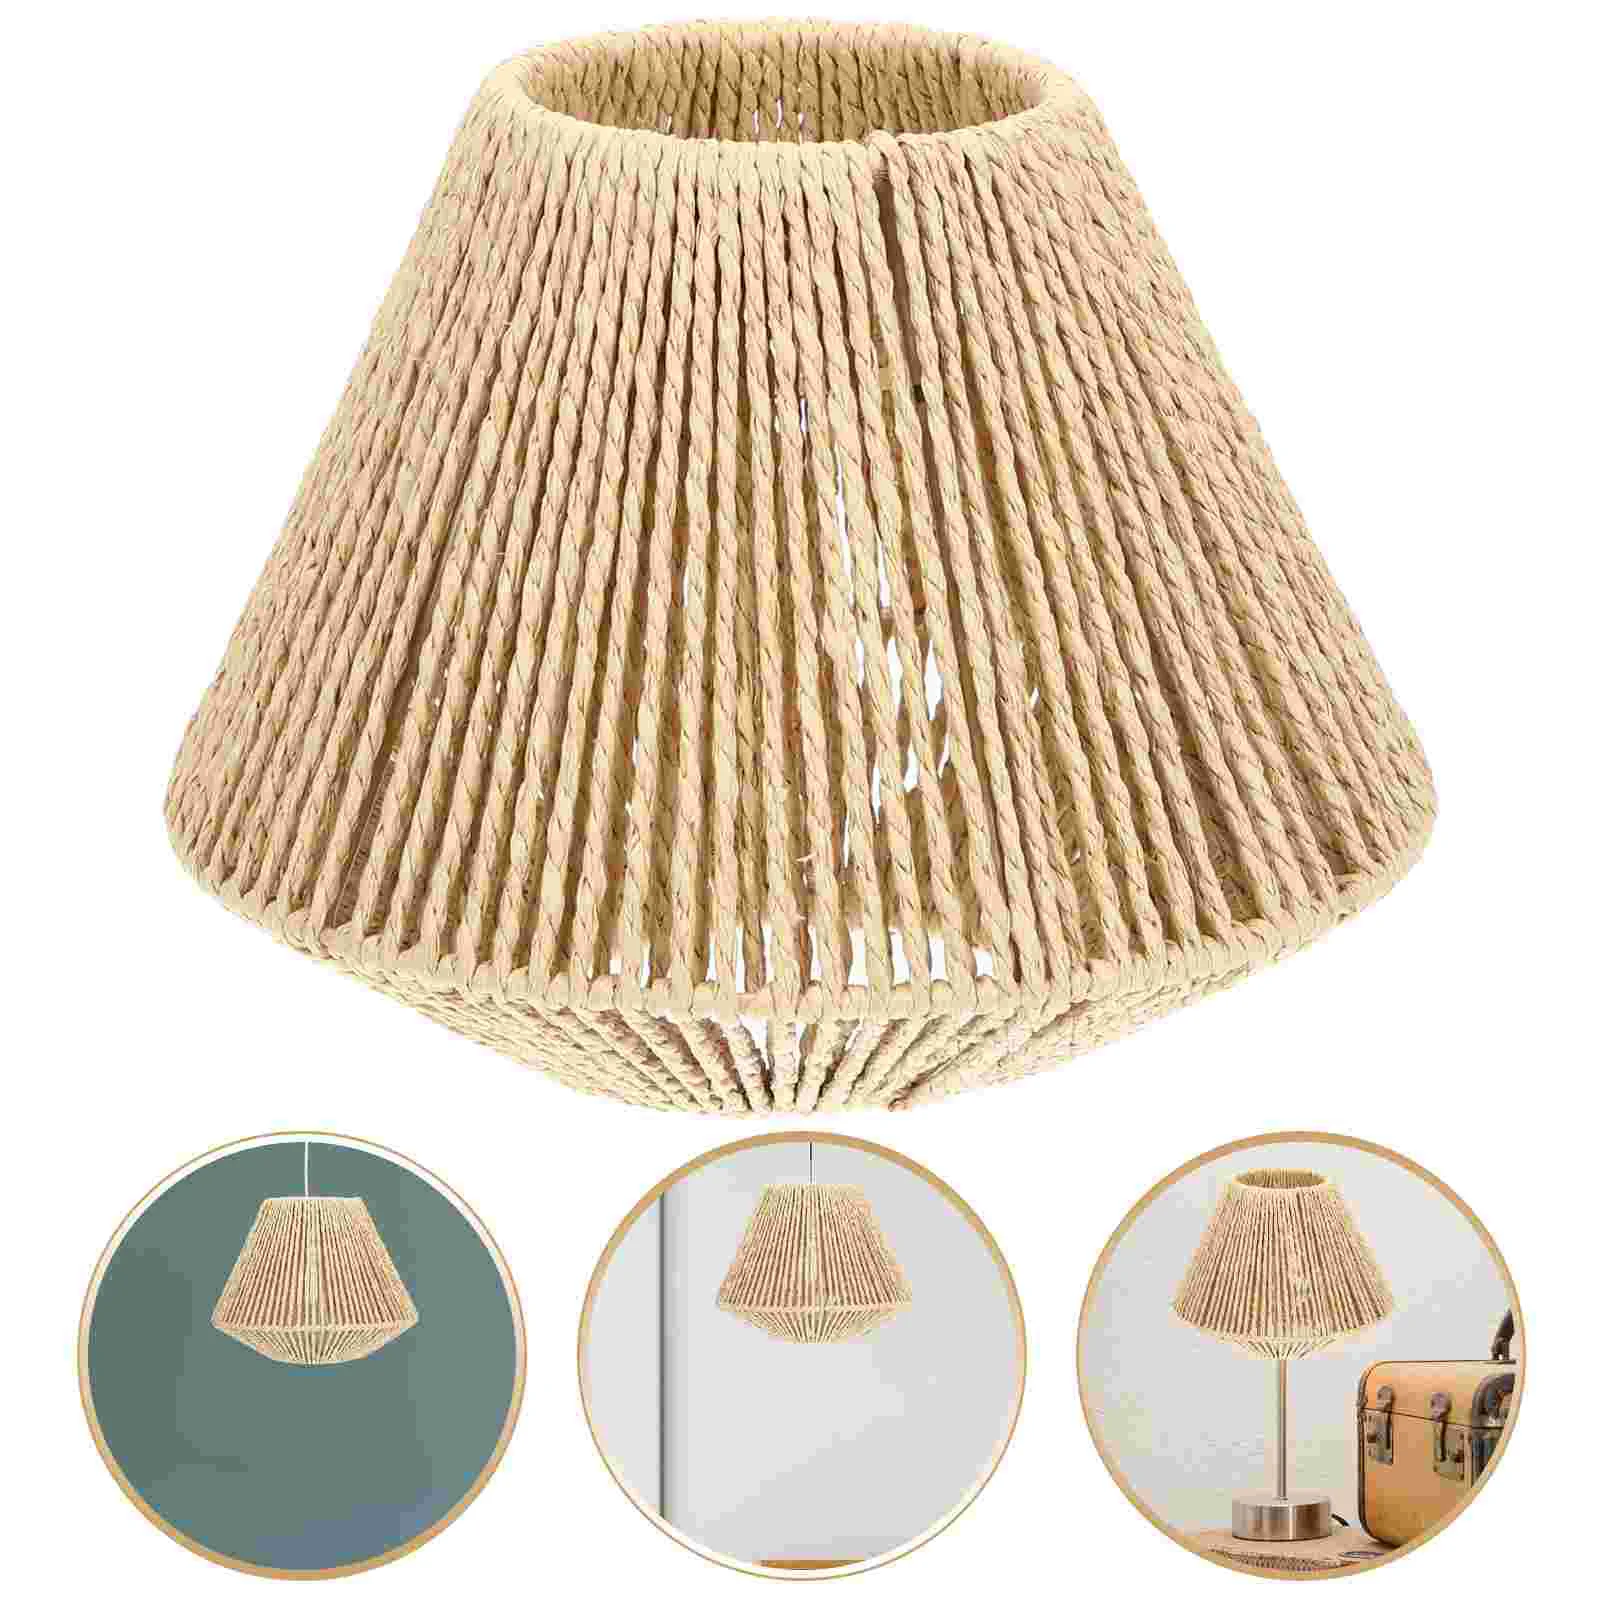 50pcs 100pcs f8mm led straw hat lamp beads 0 5w white 3v 150ma light emitting diode Straw Woven Lampshade Hanging Lamp Rustic Vintage Decor for Home Hotel Restaurant Braided Vintage Lampshade